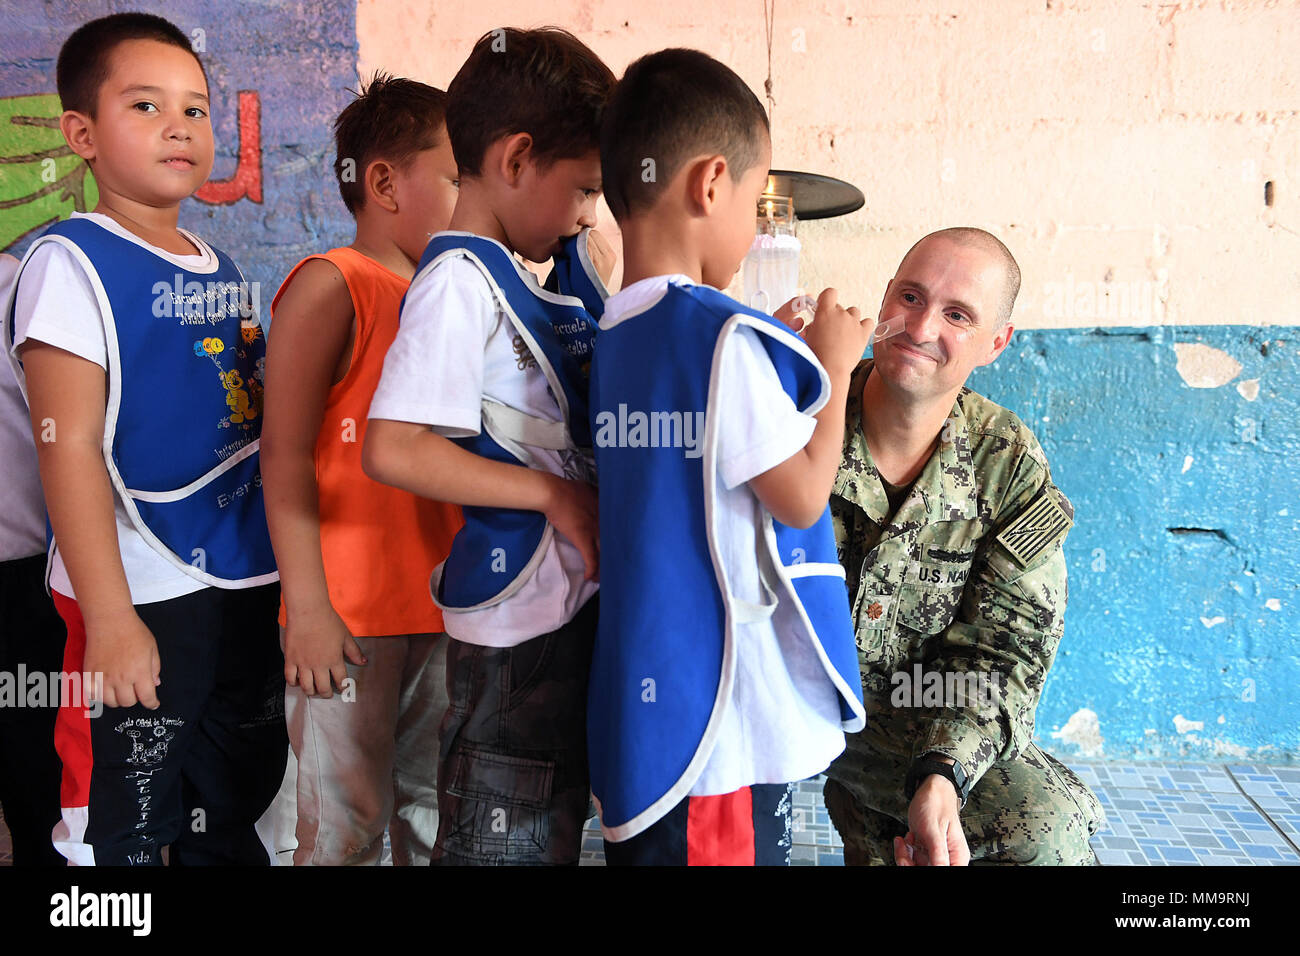 170922-N-BK435-0828 PUERTO BARRIOS, Guatemala (Sept. 22, 2017) Lt. Cmdr. Ian Sutherland, technical director for the Navy Entomology Center of Excellence, shows students insect specimens at Escuela Natalia Corriz Viuda de Morales, a Guatemalan primary school, during a Southern Partnership Station 17 community relations project (COMREL). SPS 17 is a U.S. Navy deployment executed by U.S. Naval Forces Southern Command/U.S. 4th Fleet, focused on subject matter expert exchanges with partner nation militaries and security forces in Central and South America. (U.S. Navy photo by Mass Communication Spe Stock Photo